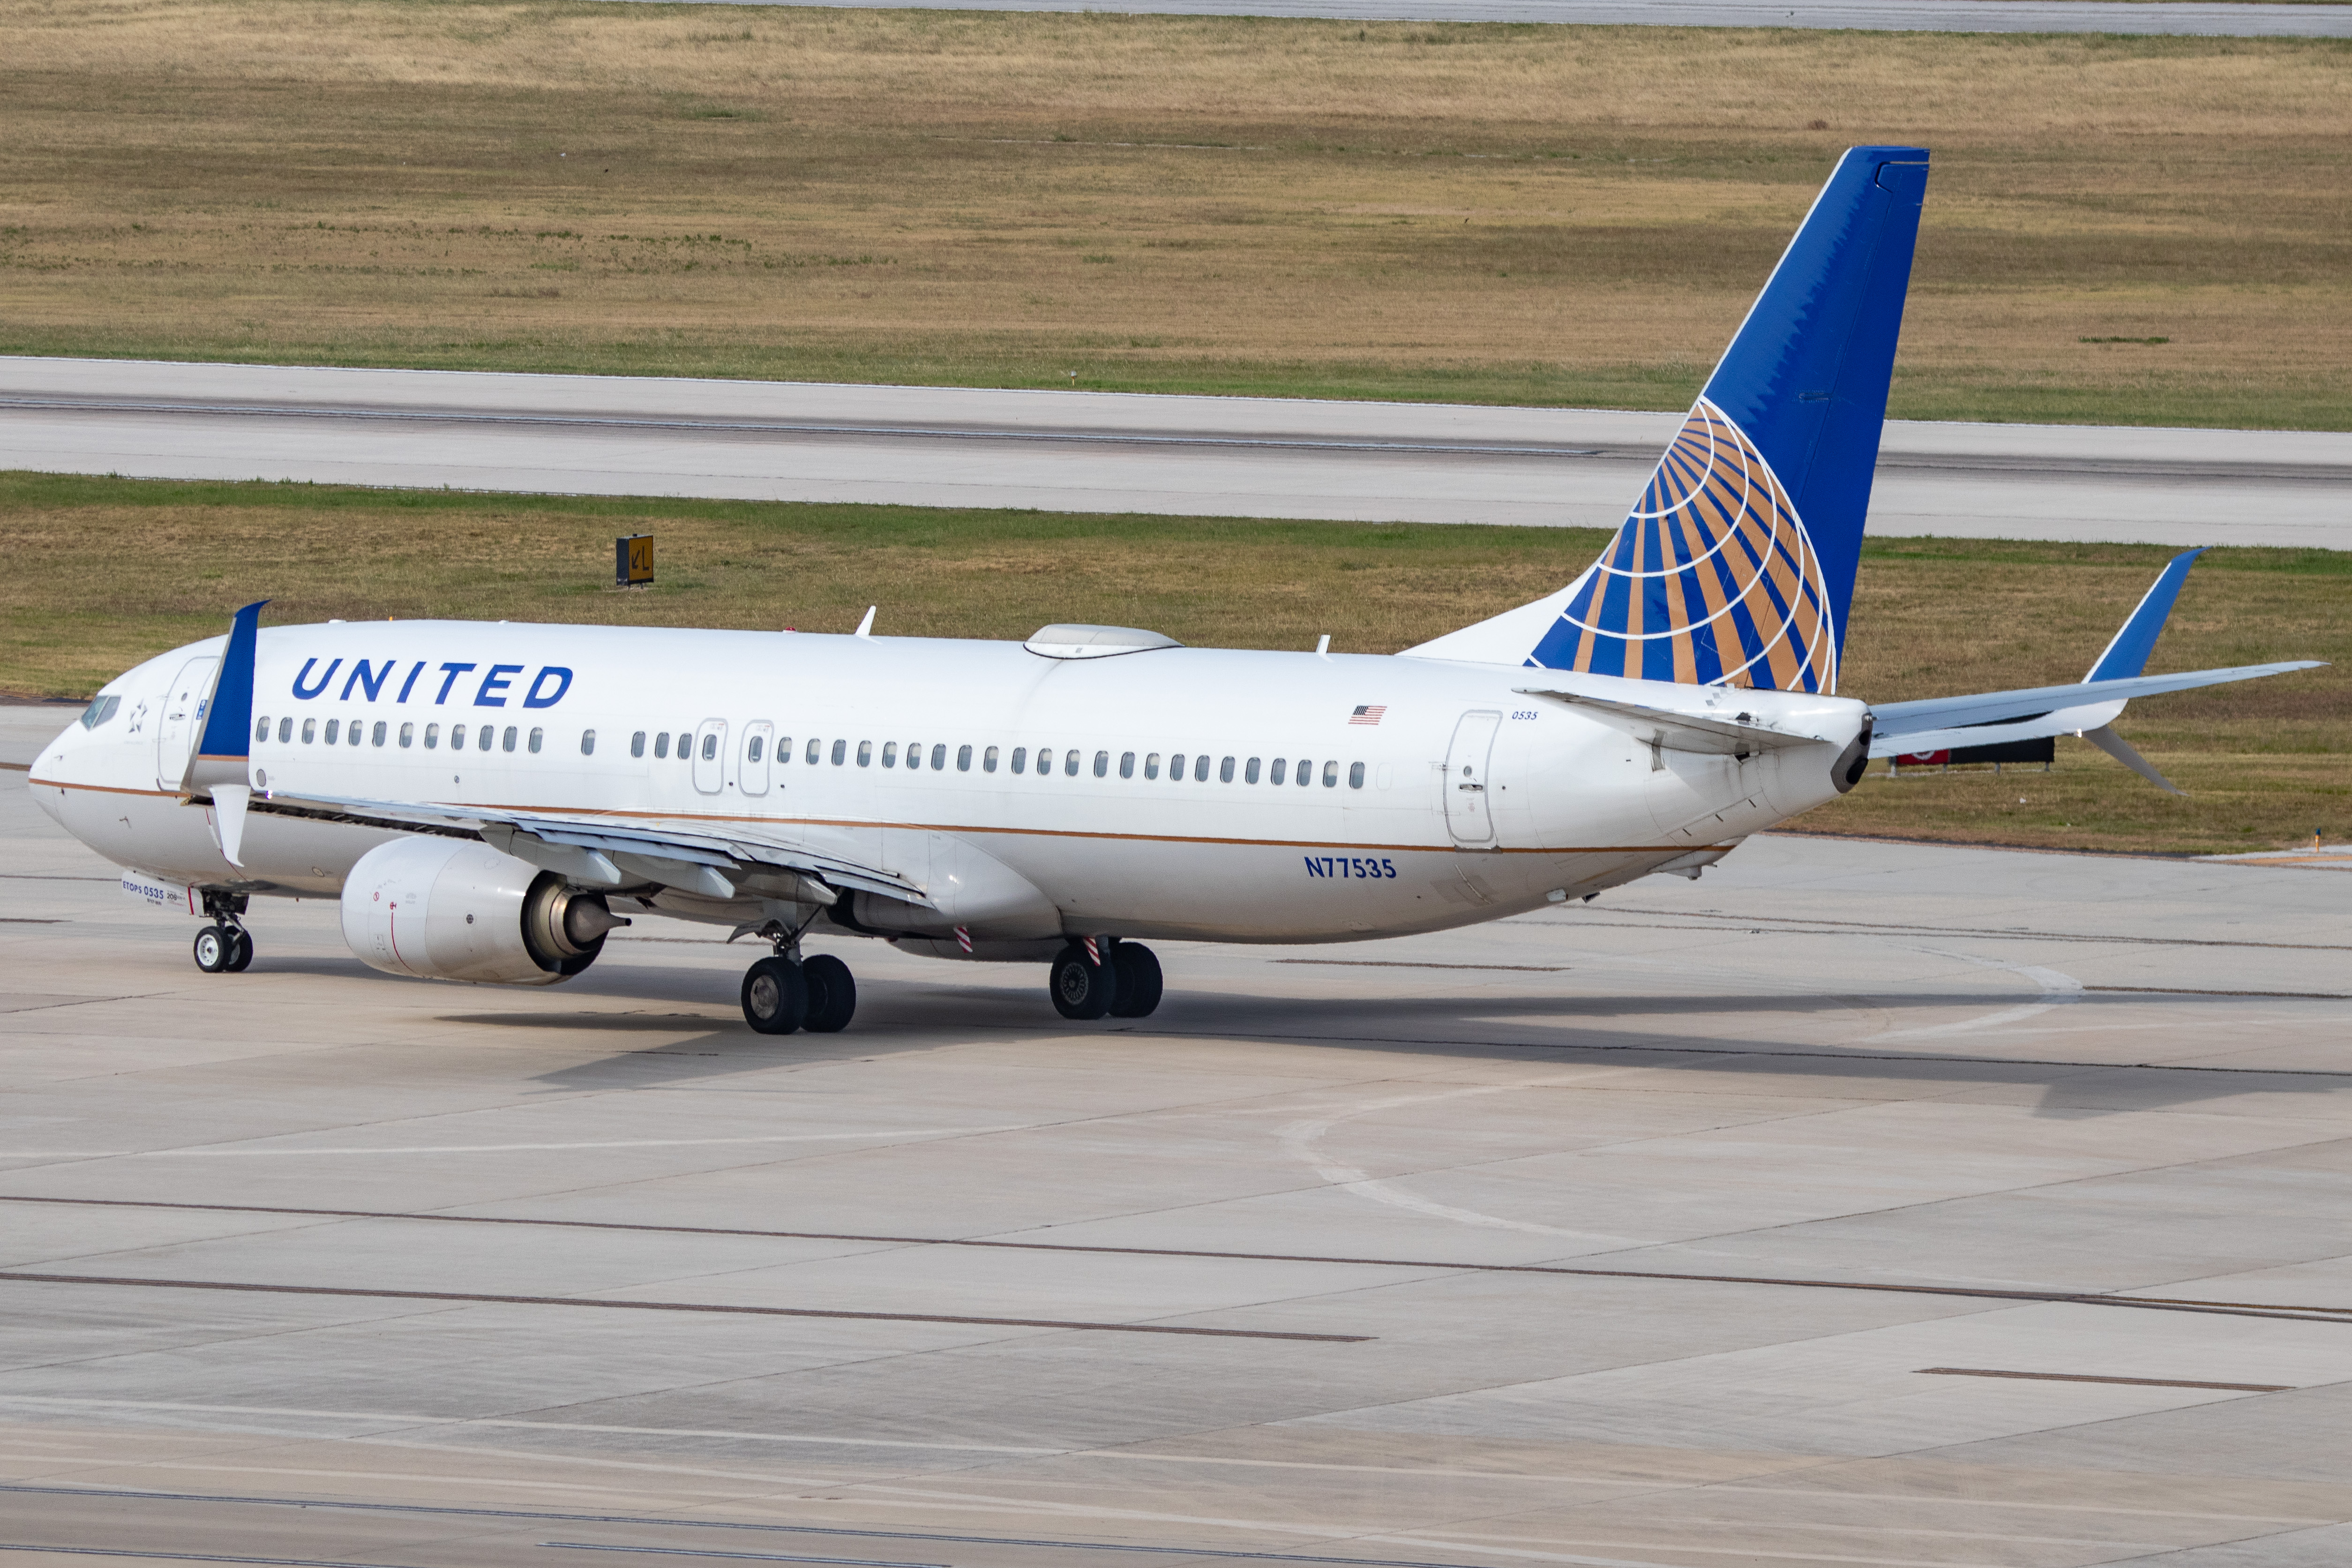 Photo of N77535 - United Airlines Boeing 737-800 at SAT